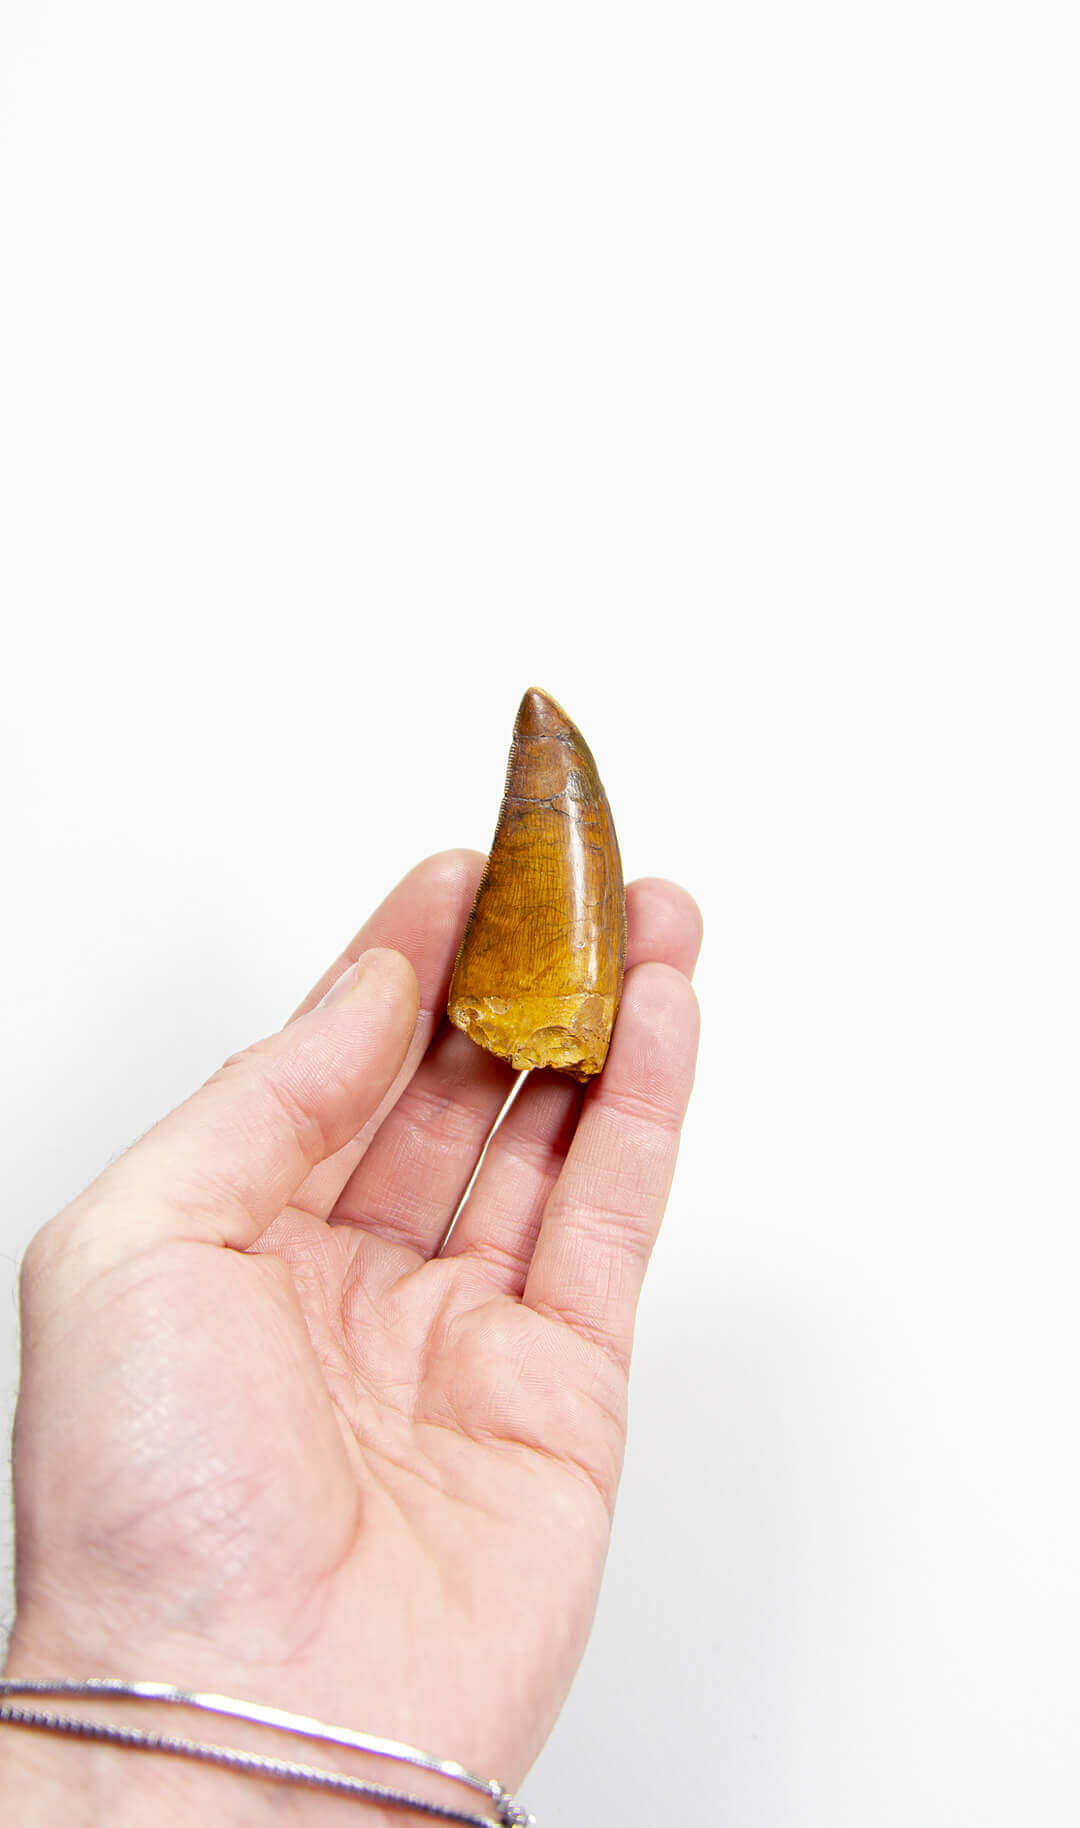 real fossil dinosaur carcharodontosaurus tooth for sale at the uk fossil store 26